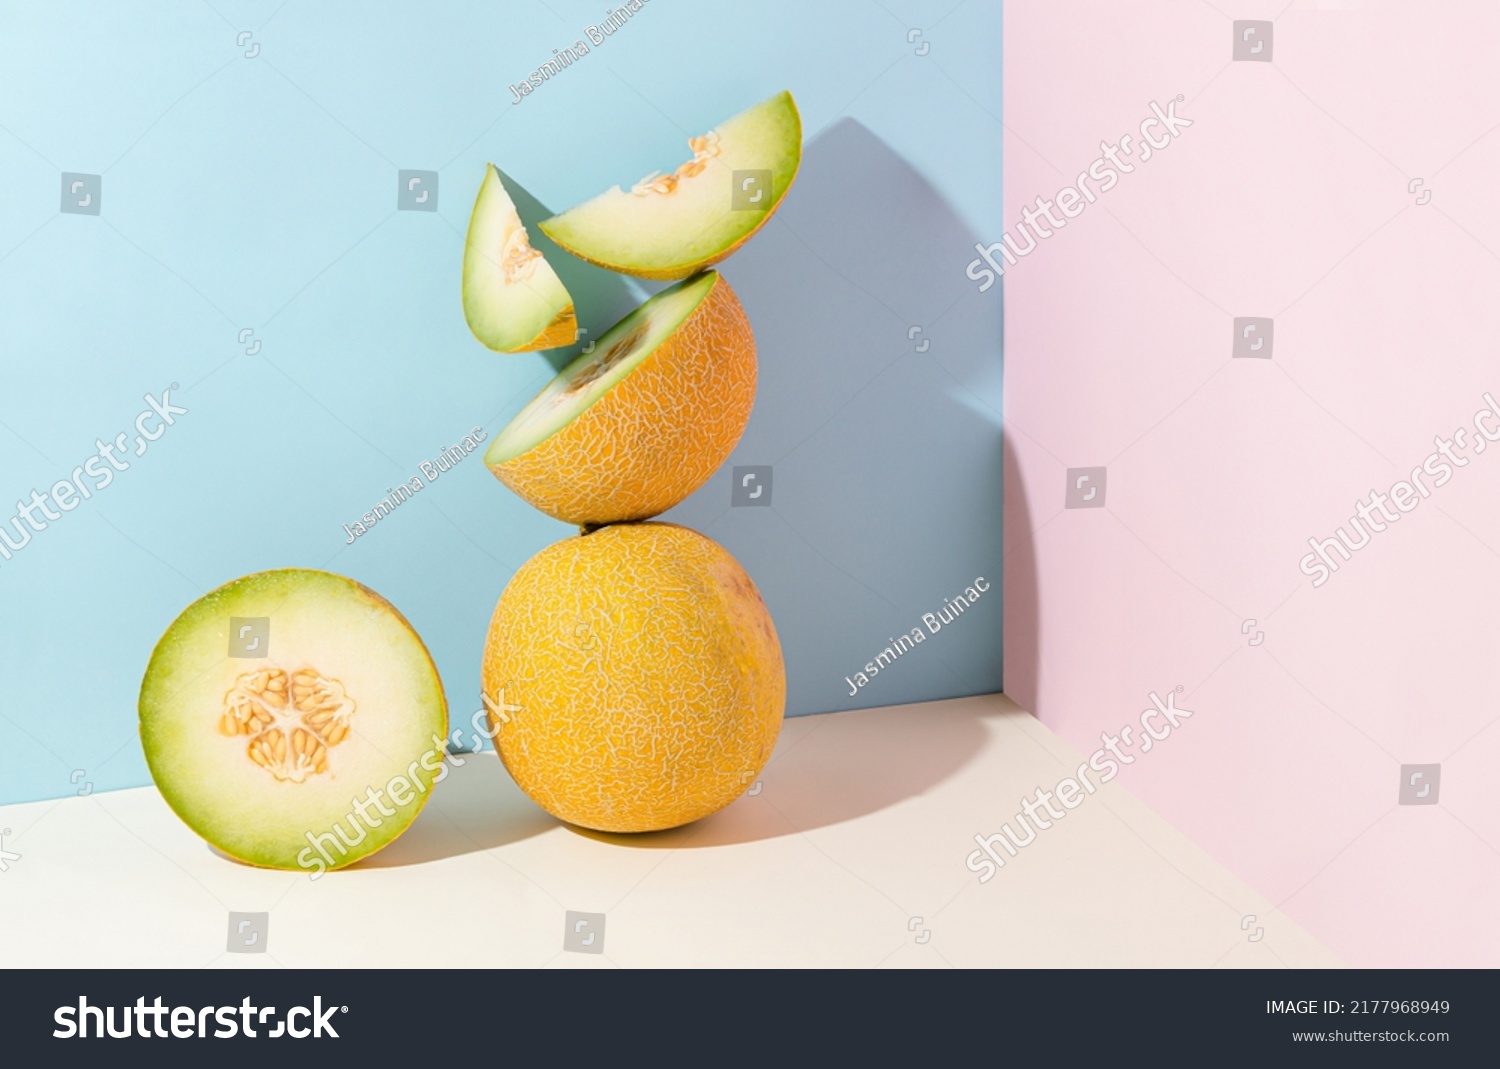 Minimal abstract creative summer fruit scene made with slices of juicy, fresh melon standing on isolated pastel beige, pink and blue background with copy space. Aesthetic concept of raw healthy food. #2177968949